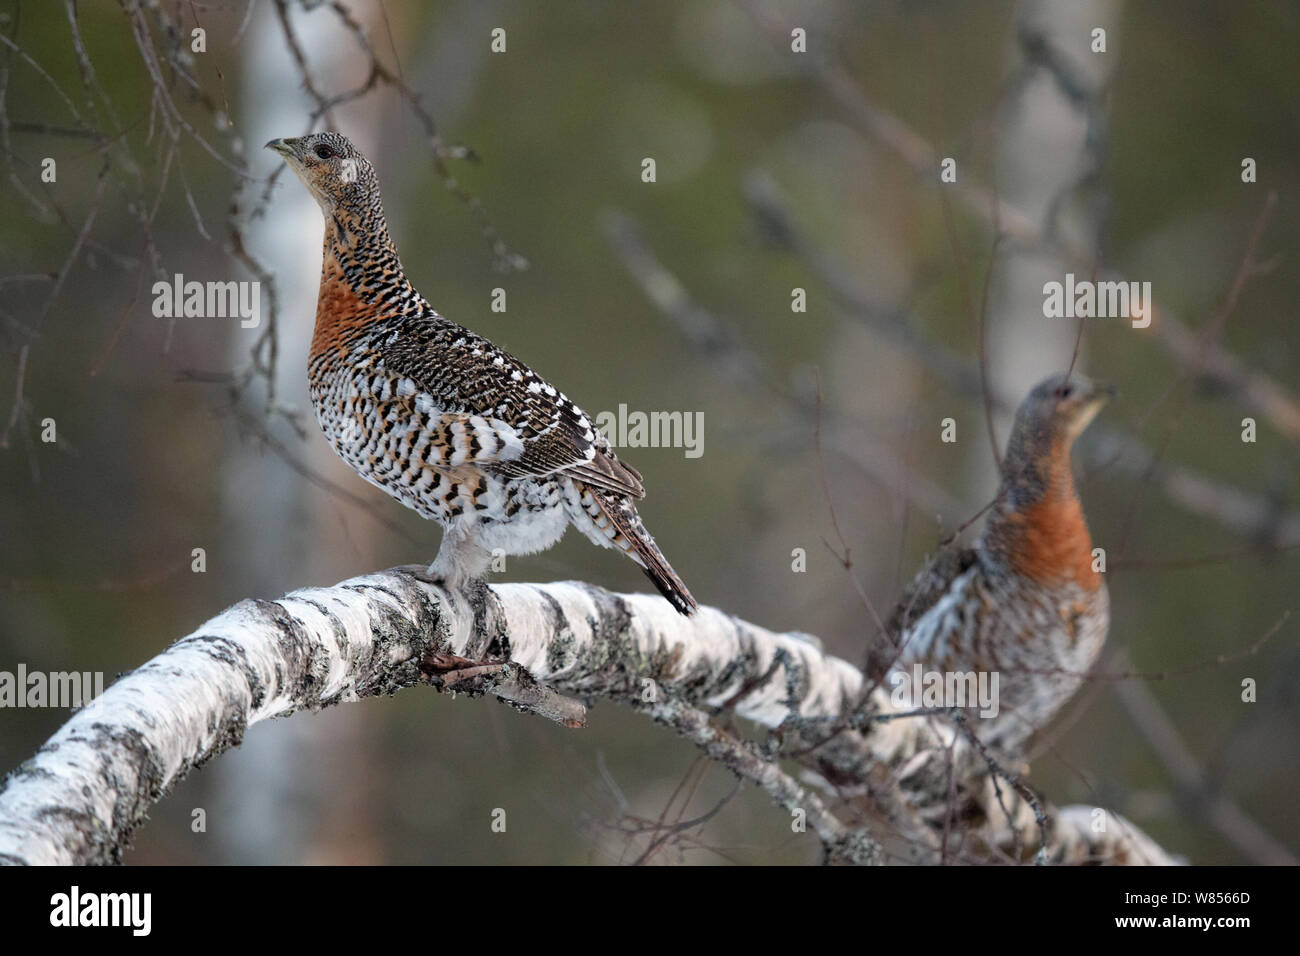 Capercaillie (Tetrao urogallus) two females perched in tree, Vaala Finland April Stock Photo